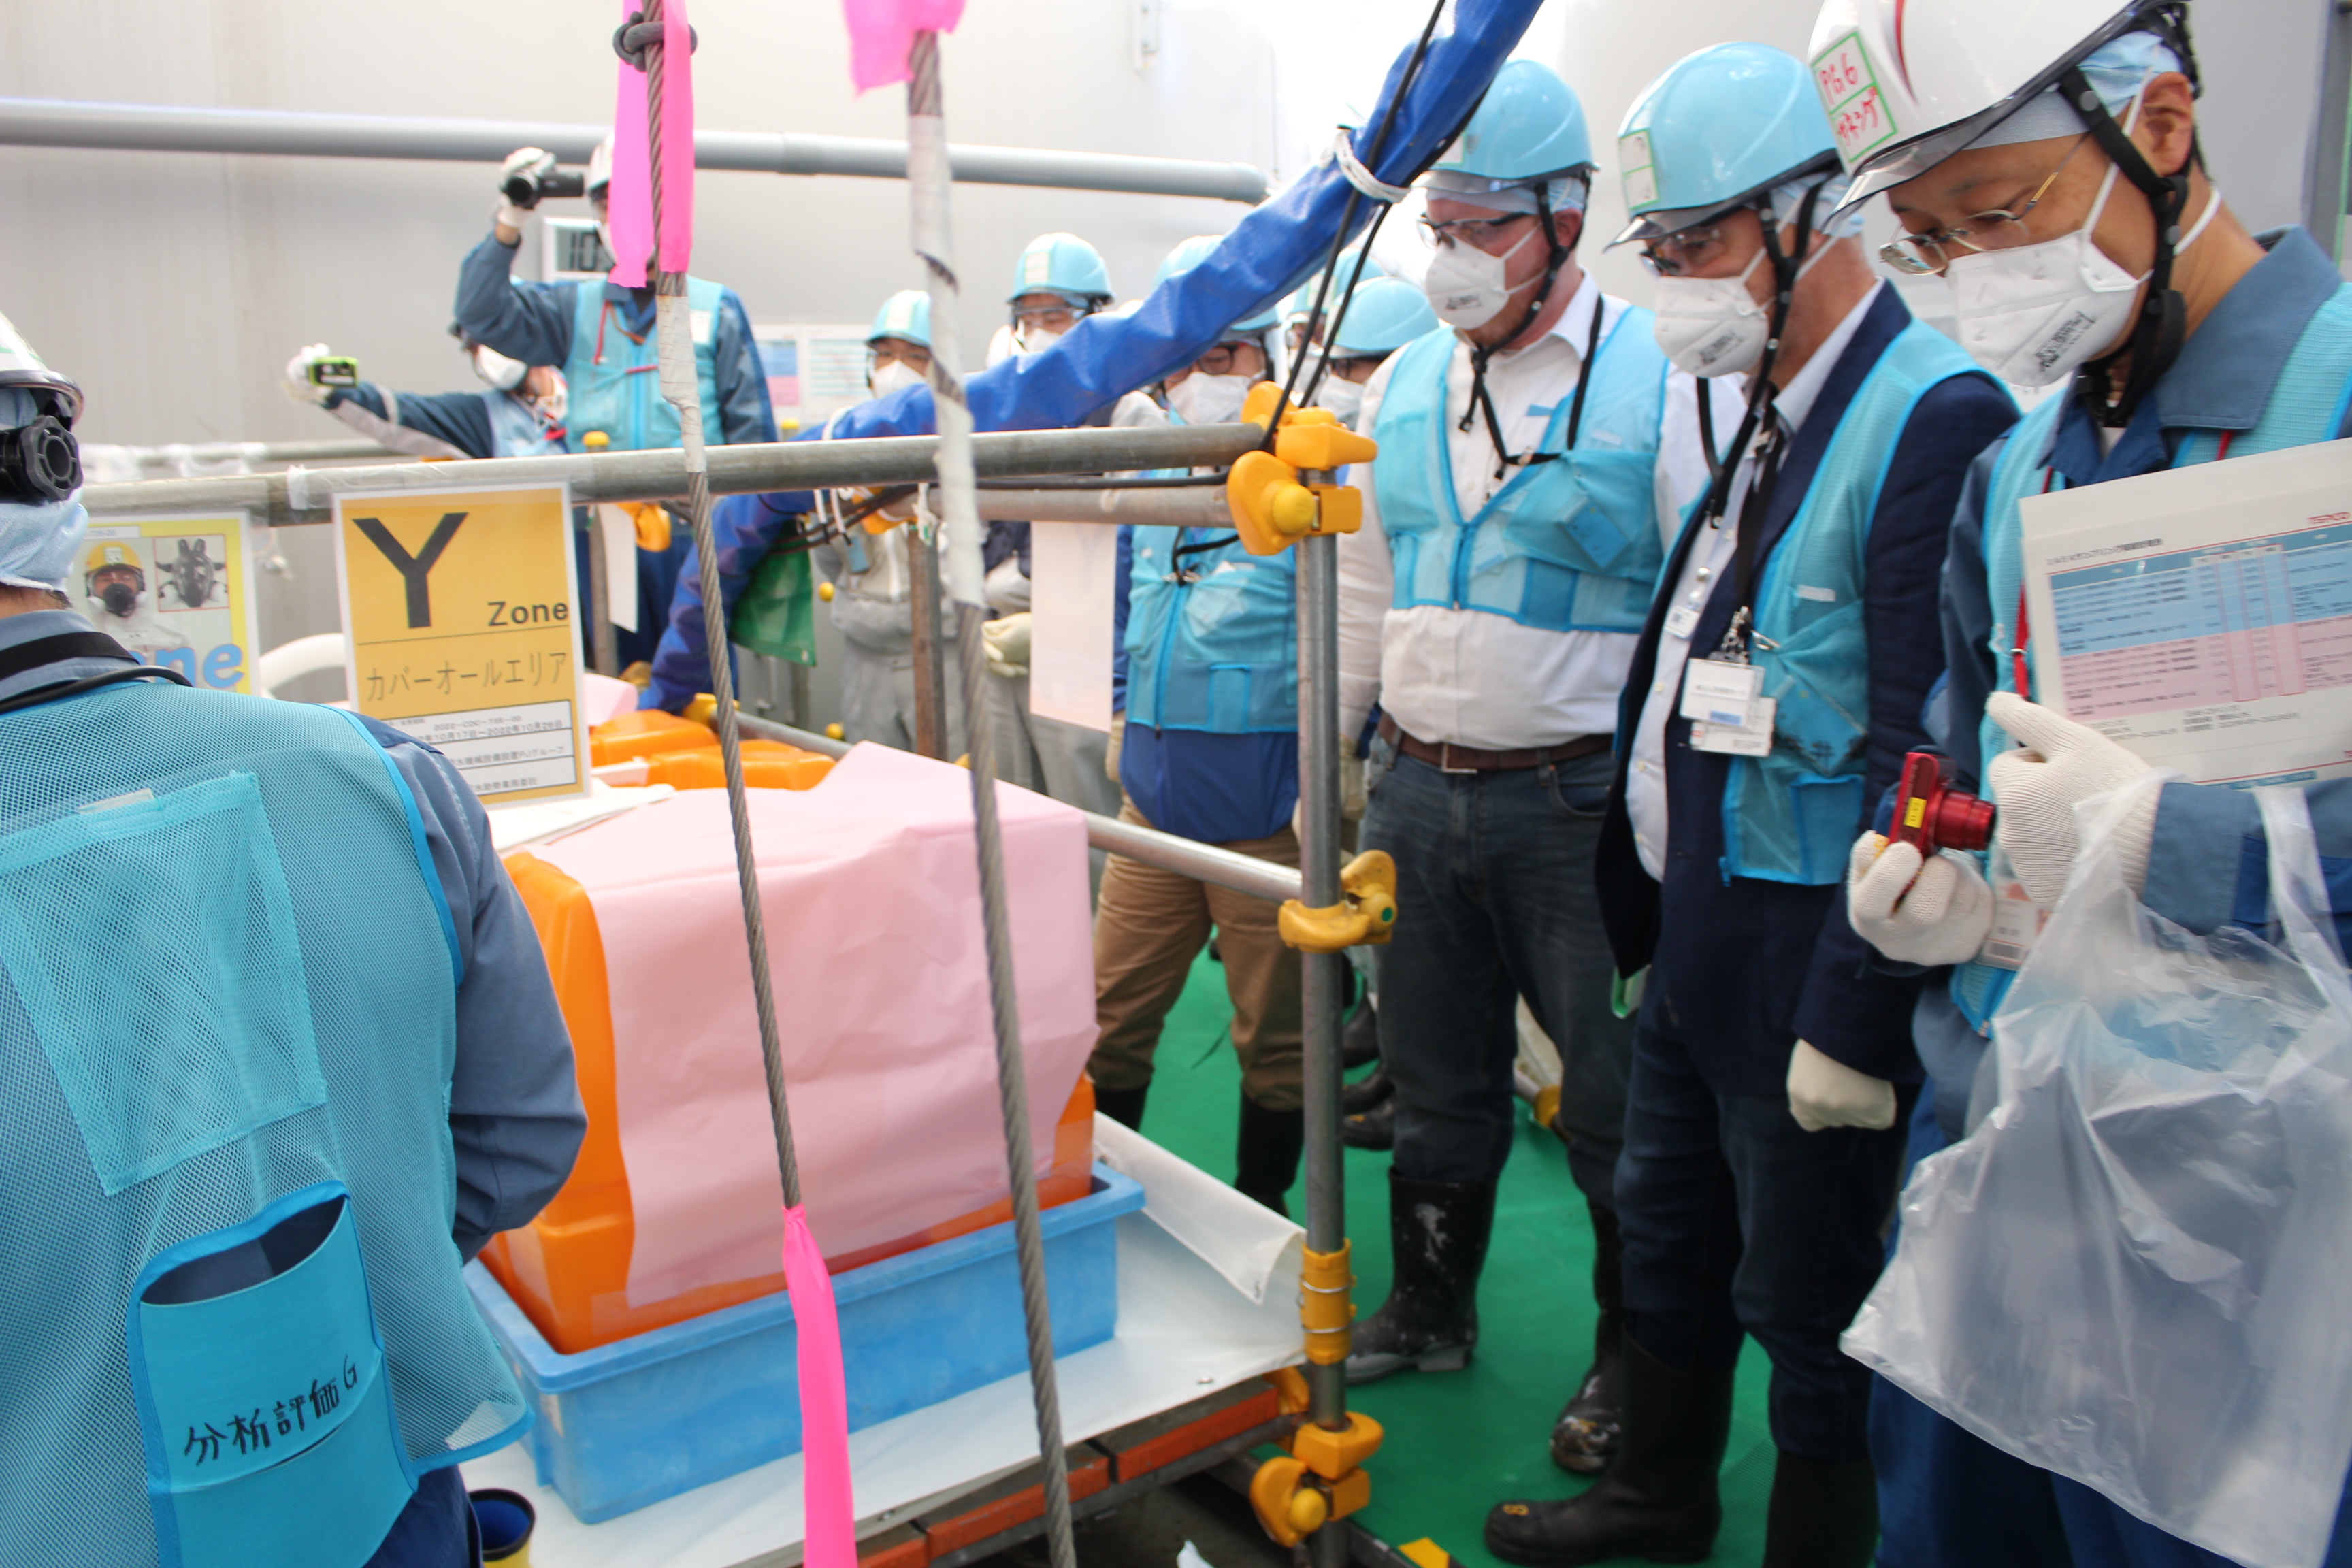 The third observation of the sampling of ALPS treated water by IAEA review team at the Fukushima Daiichi Nuclear Power Station